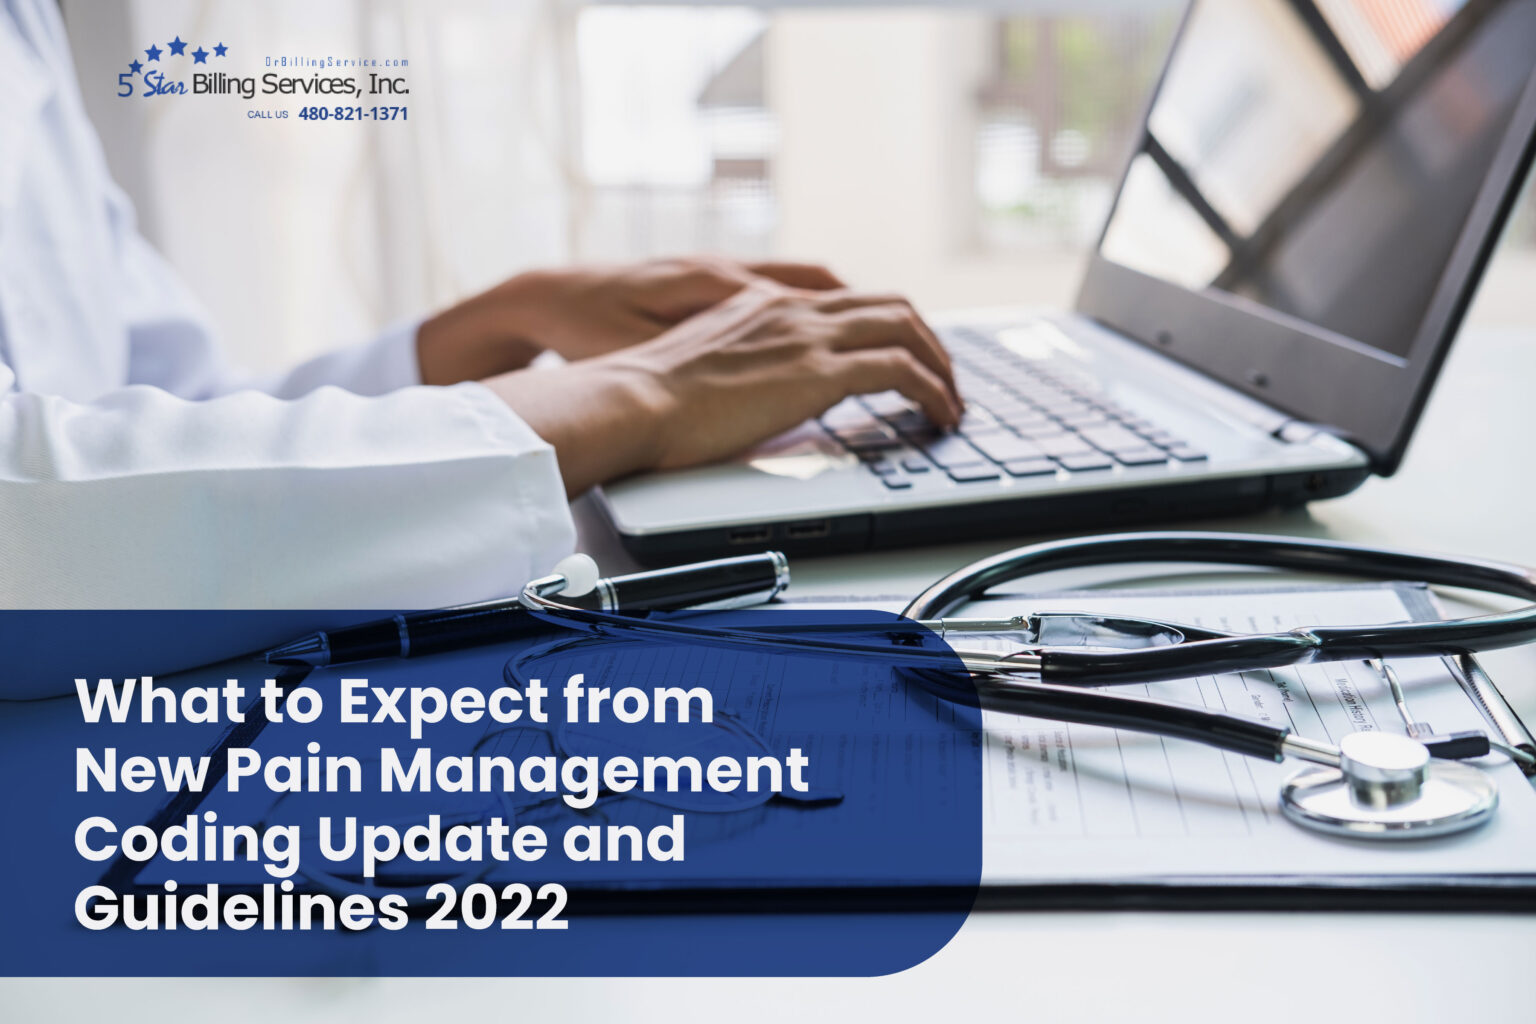 New Pain Management Coding Updates and Guidelines 2022